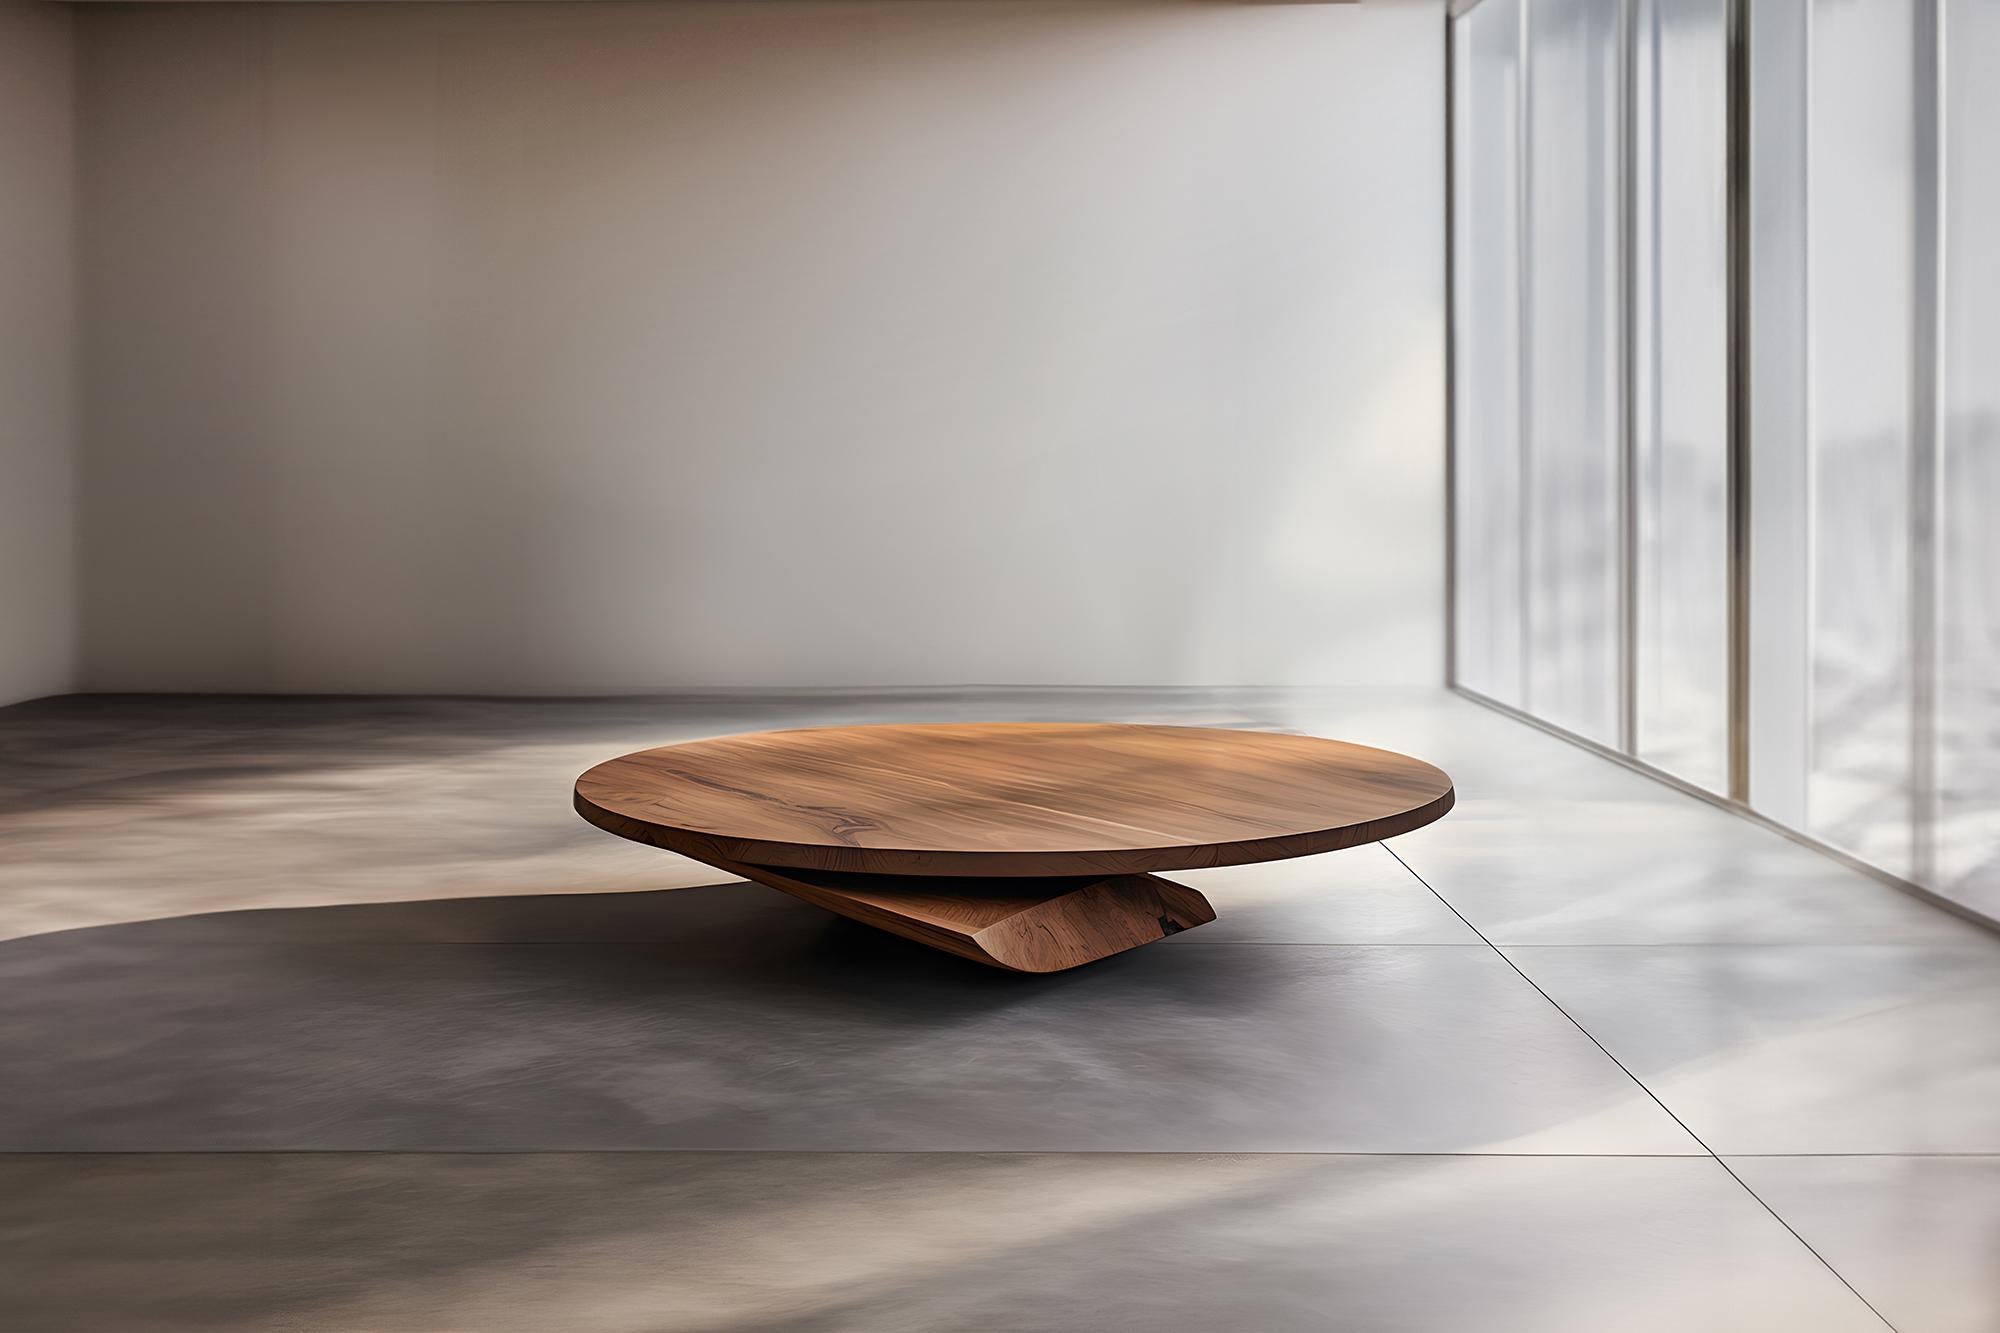 Sculptural Coffee Table Made of Solid Wood, Center Table Solace S51     by Joel Escalona


The Solace table series, designed by Joel Escalona, is a furniture collection that exudes balance and presence, thanks to its sensuous, dense, and irregular